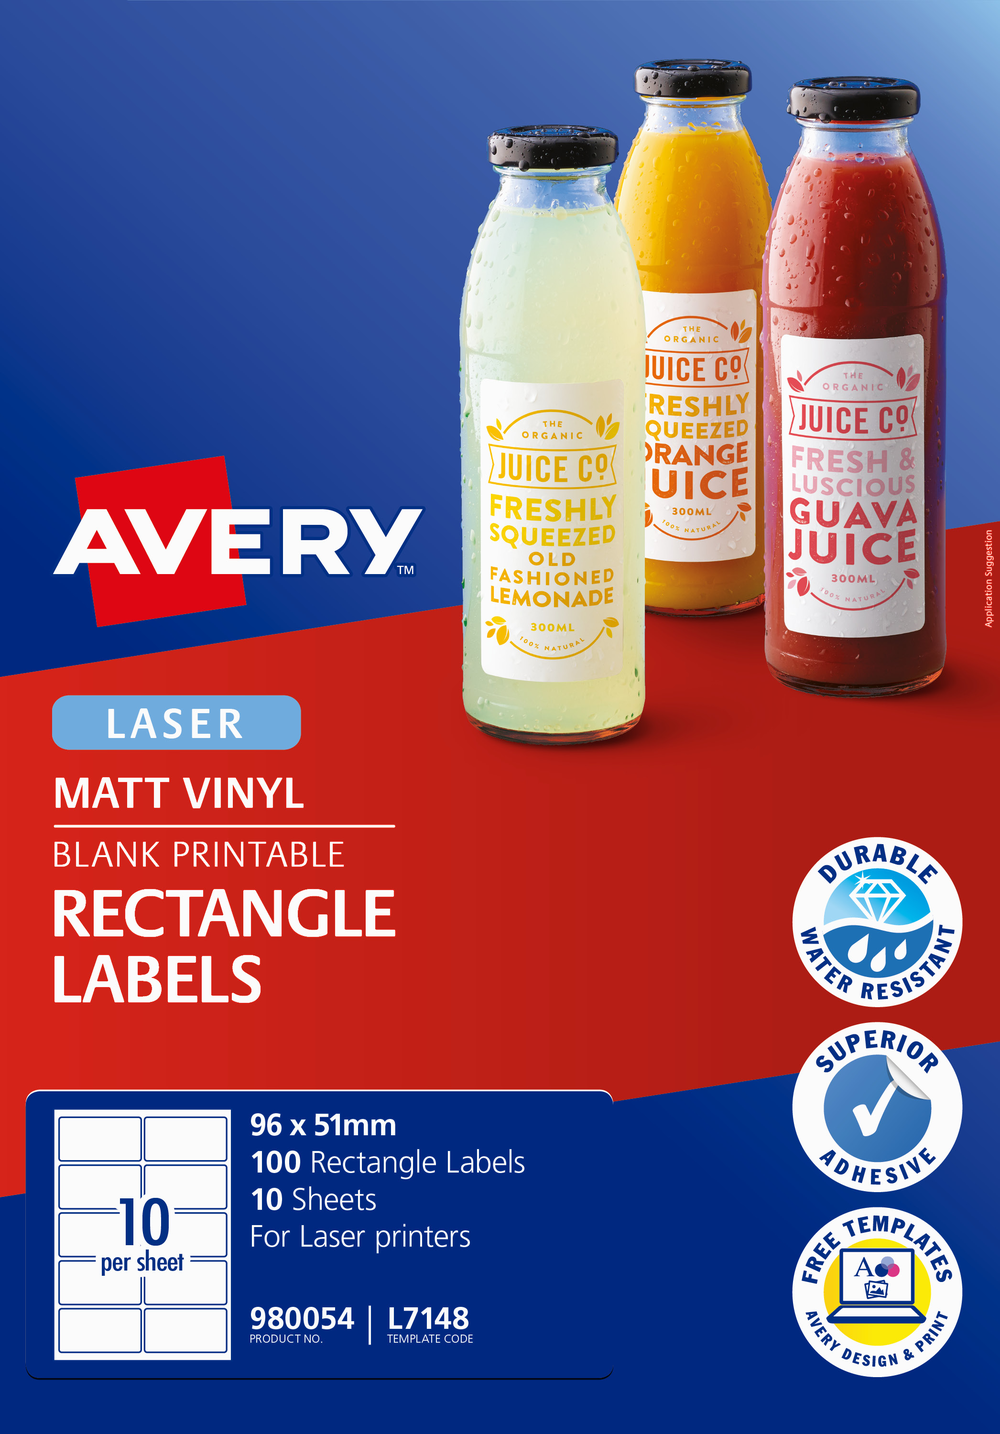 Avery Durable Rectangular Labels 96mm X 51mm Pack Of 100 